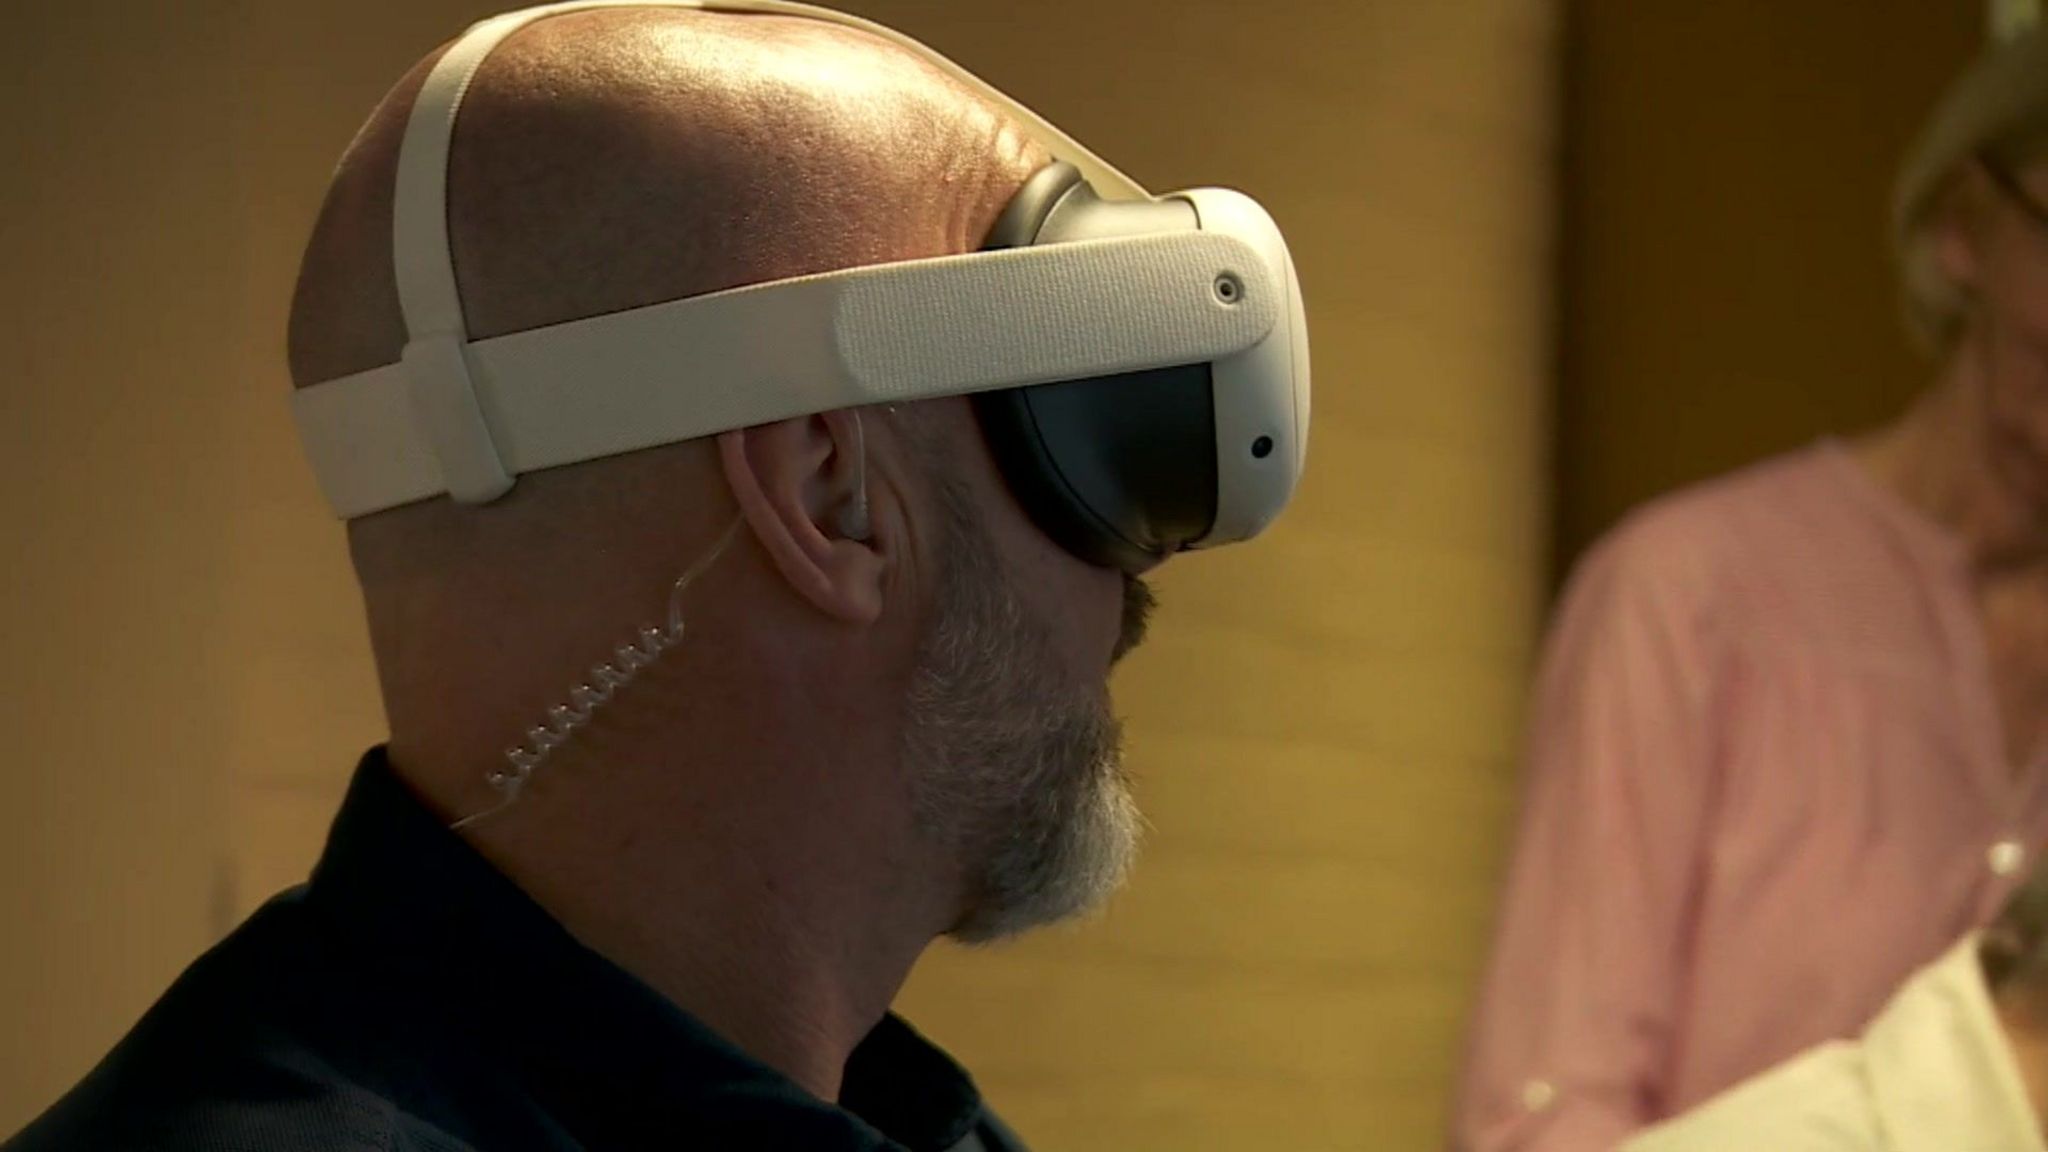 A man wearing a white virtual reality set. He is in the room with other people, only his left profile is visible as he is turned away from the camera